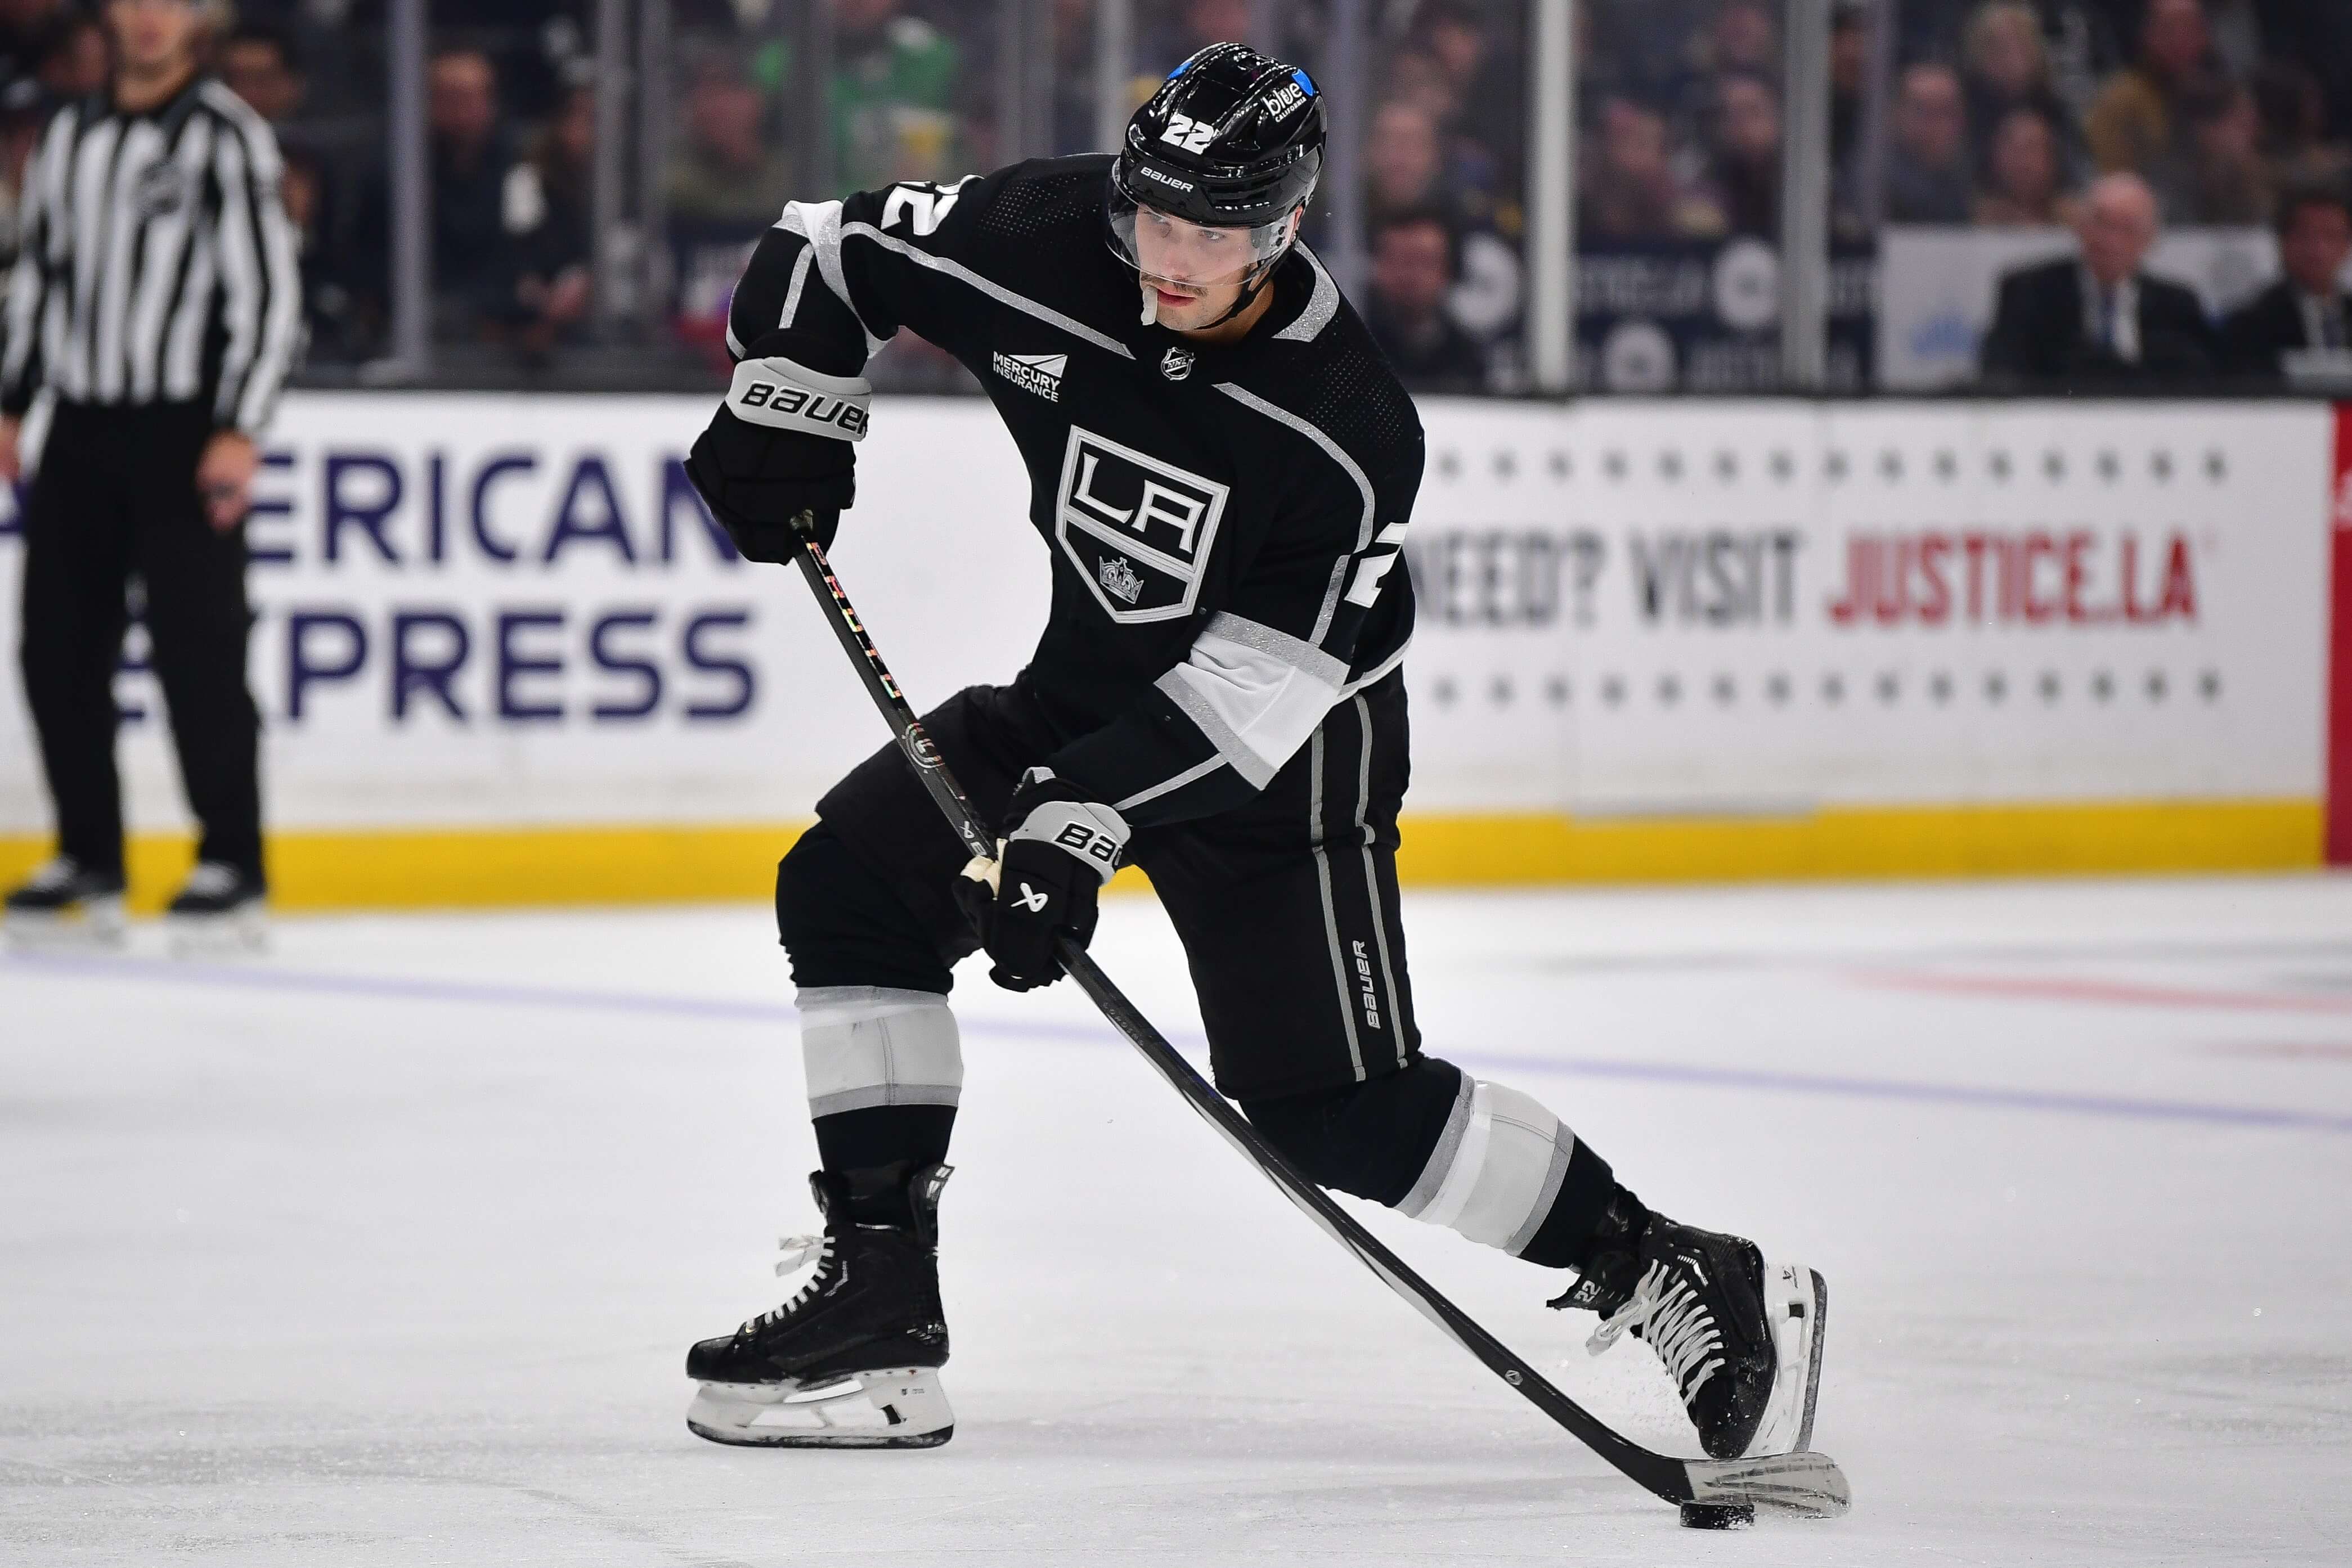 How To Bet - Blackhawks vs Kings Predictions, Picks, and Odds for Tonight’s NHL Game